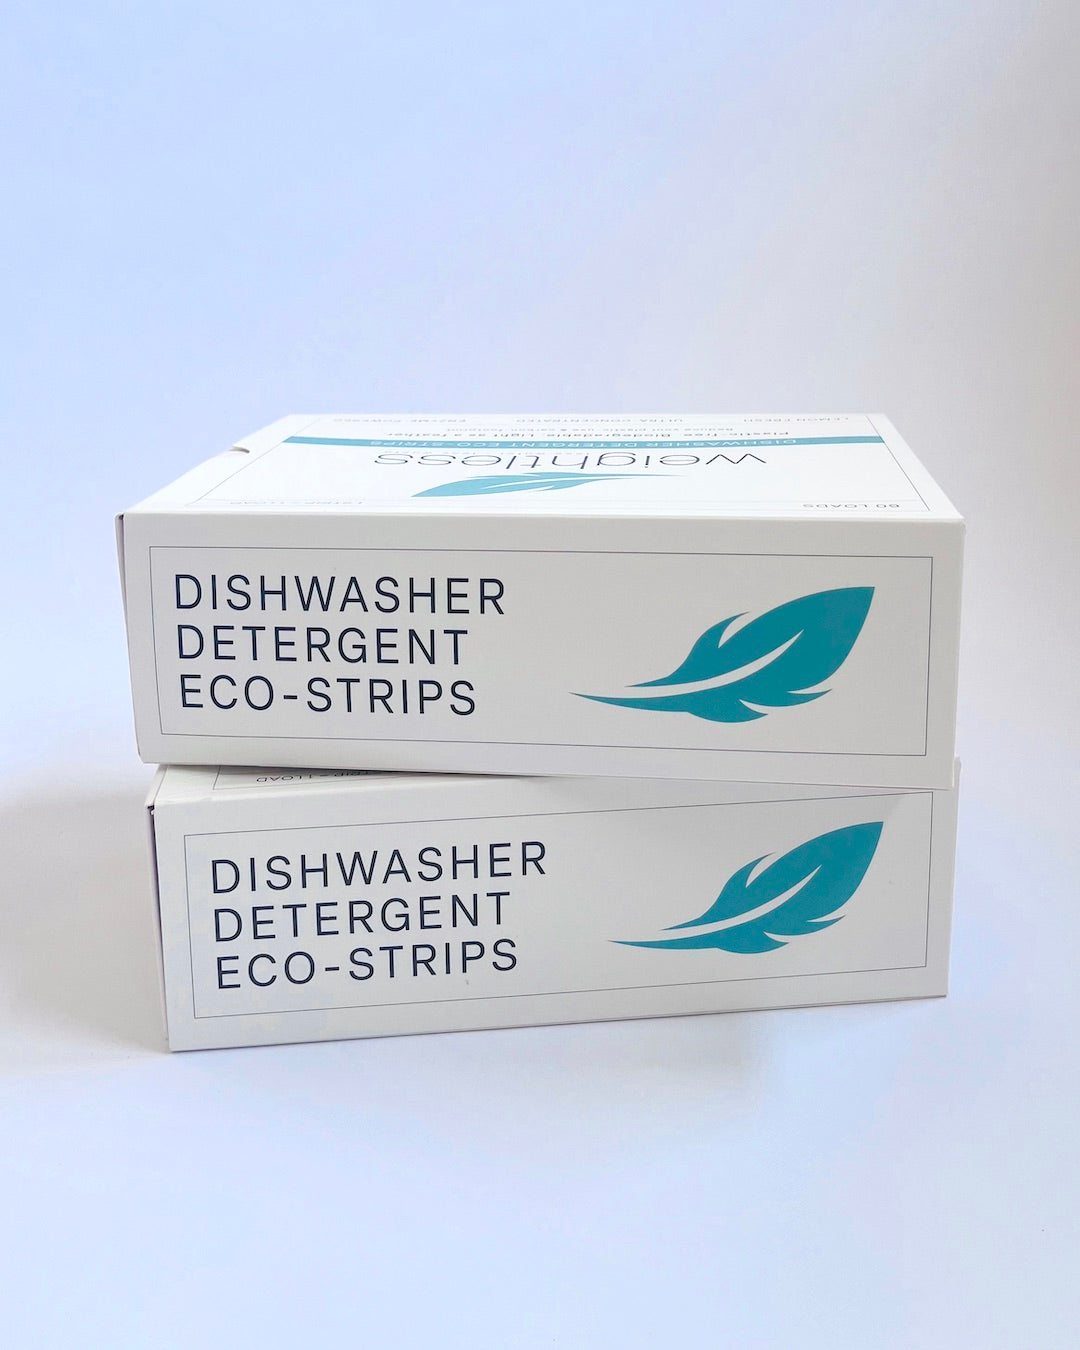 For Friends - Free Sample Pack - Dishwasher Detergent Eco-Strips